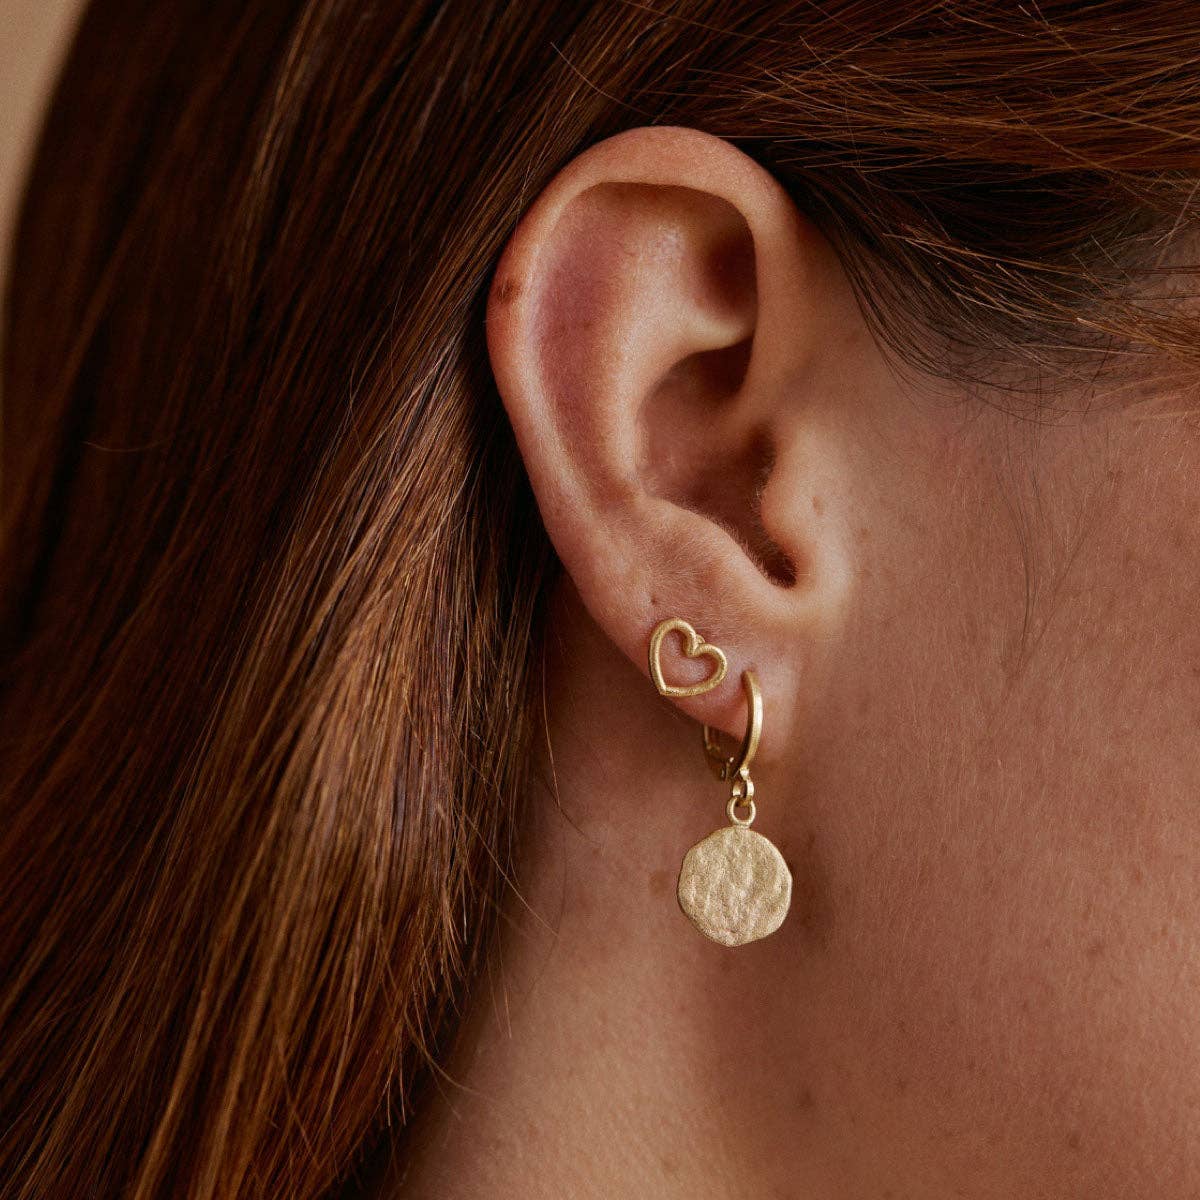 Luna Earrings | Jewelry Gold Gift Waterproof - Out of the Blue